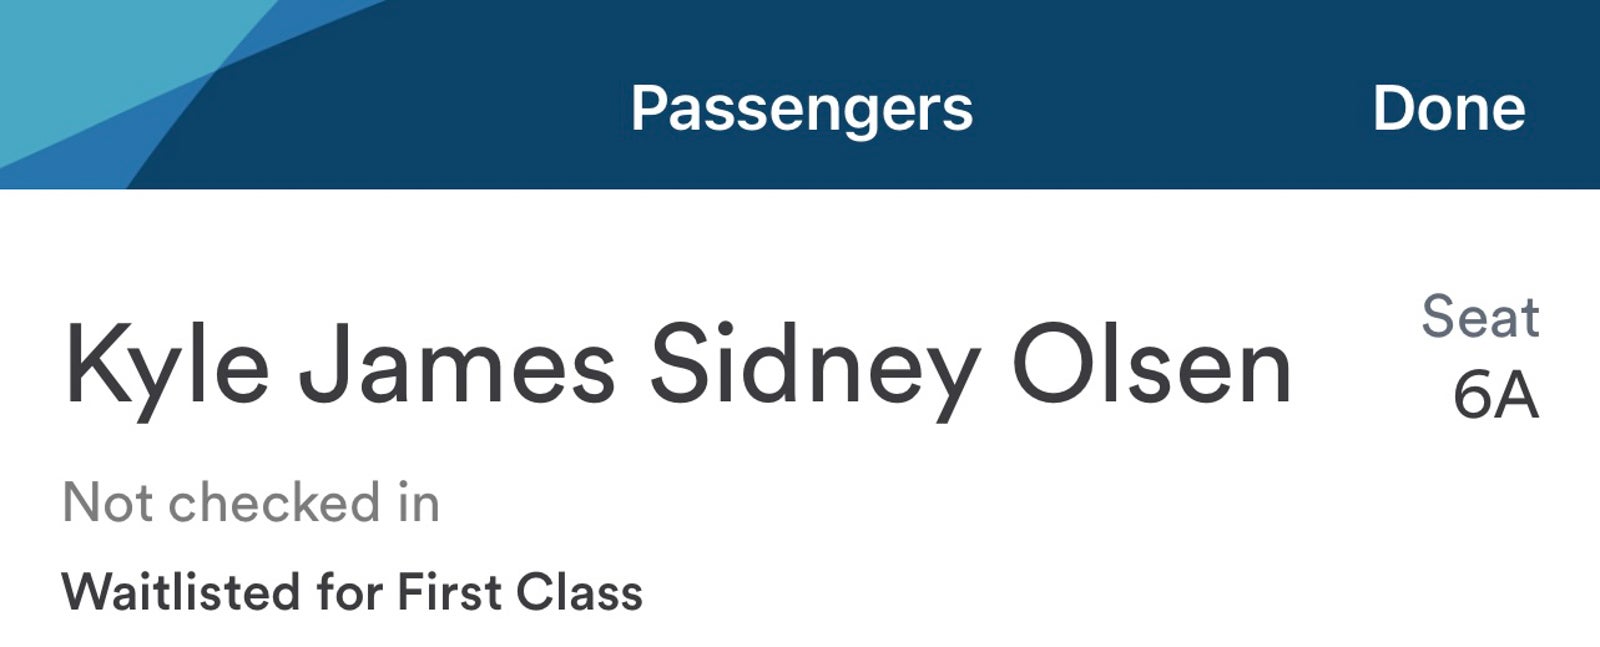 Waitlisted for first class Alaska Airlines